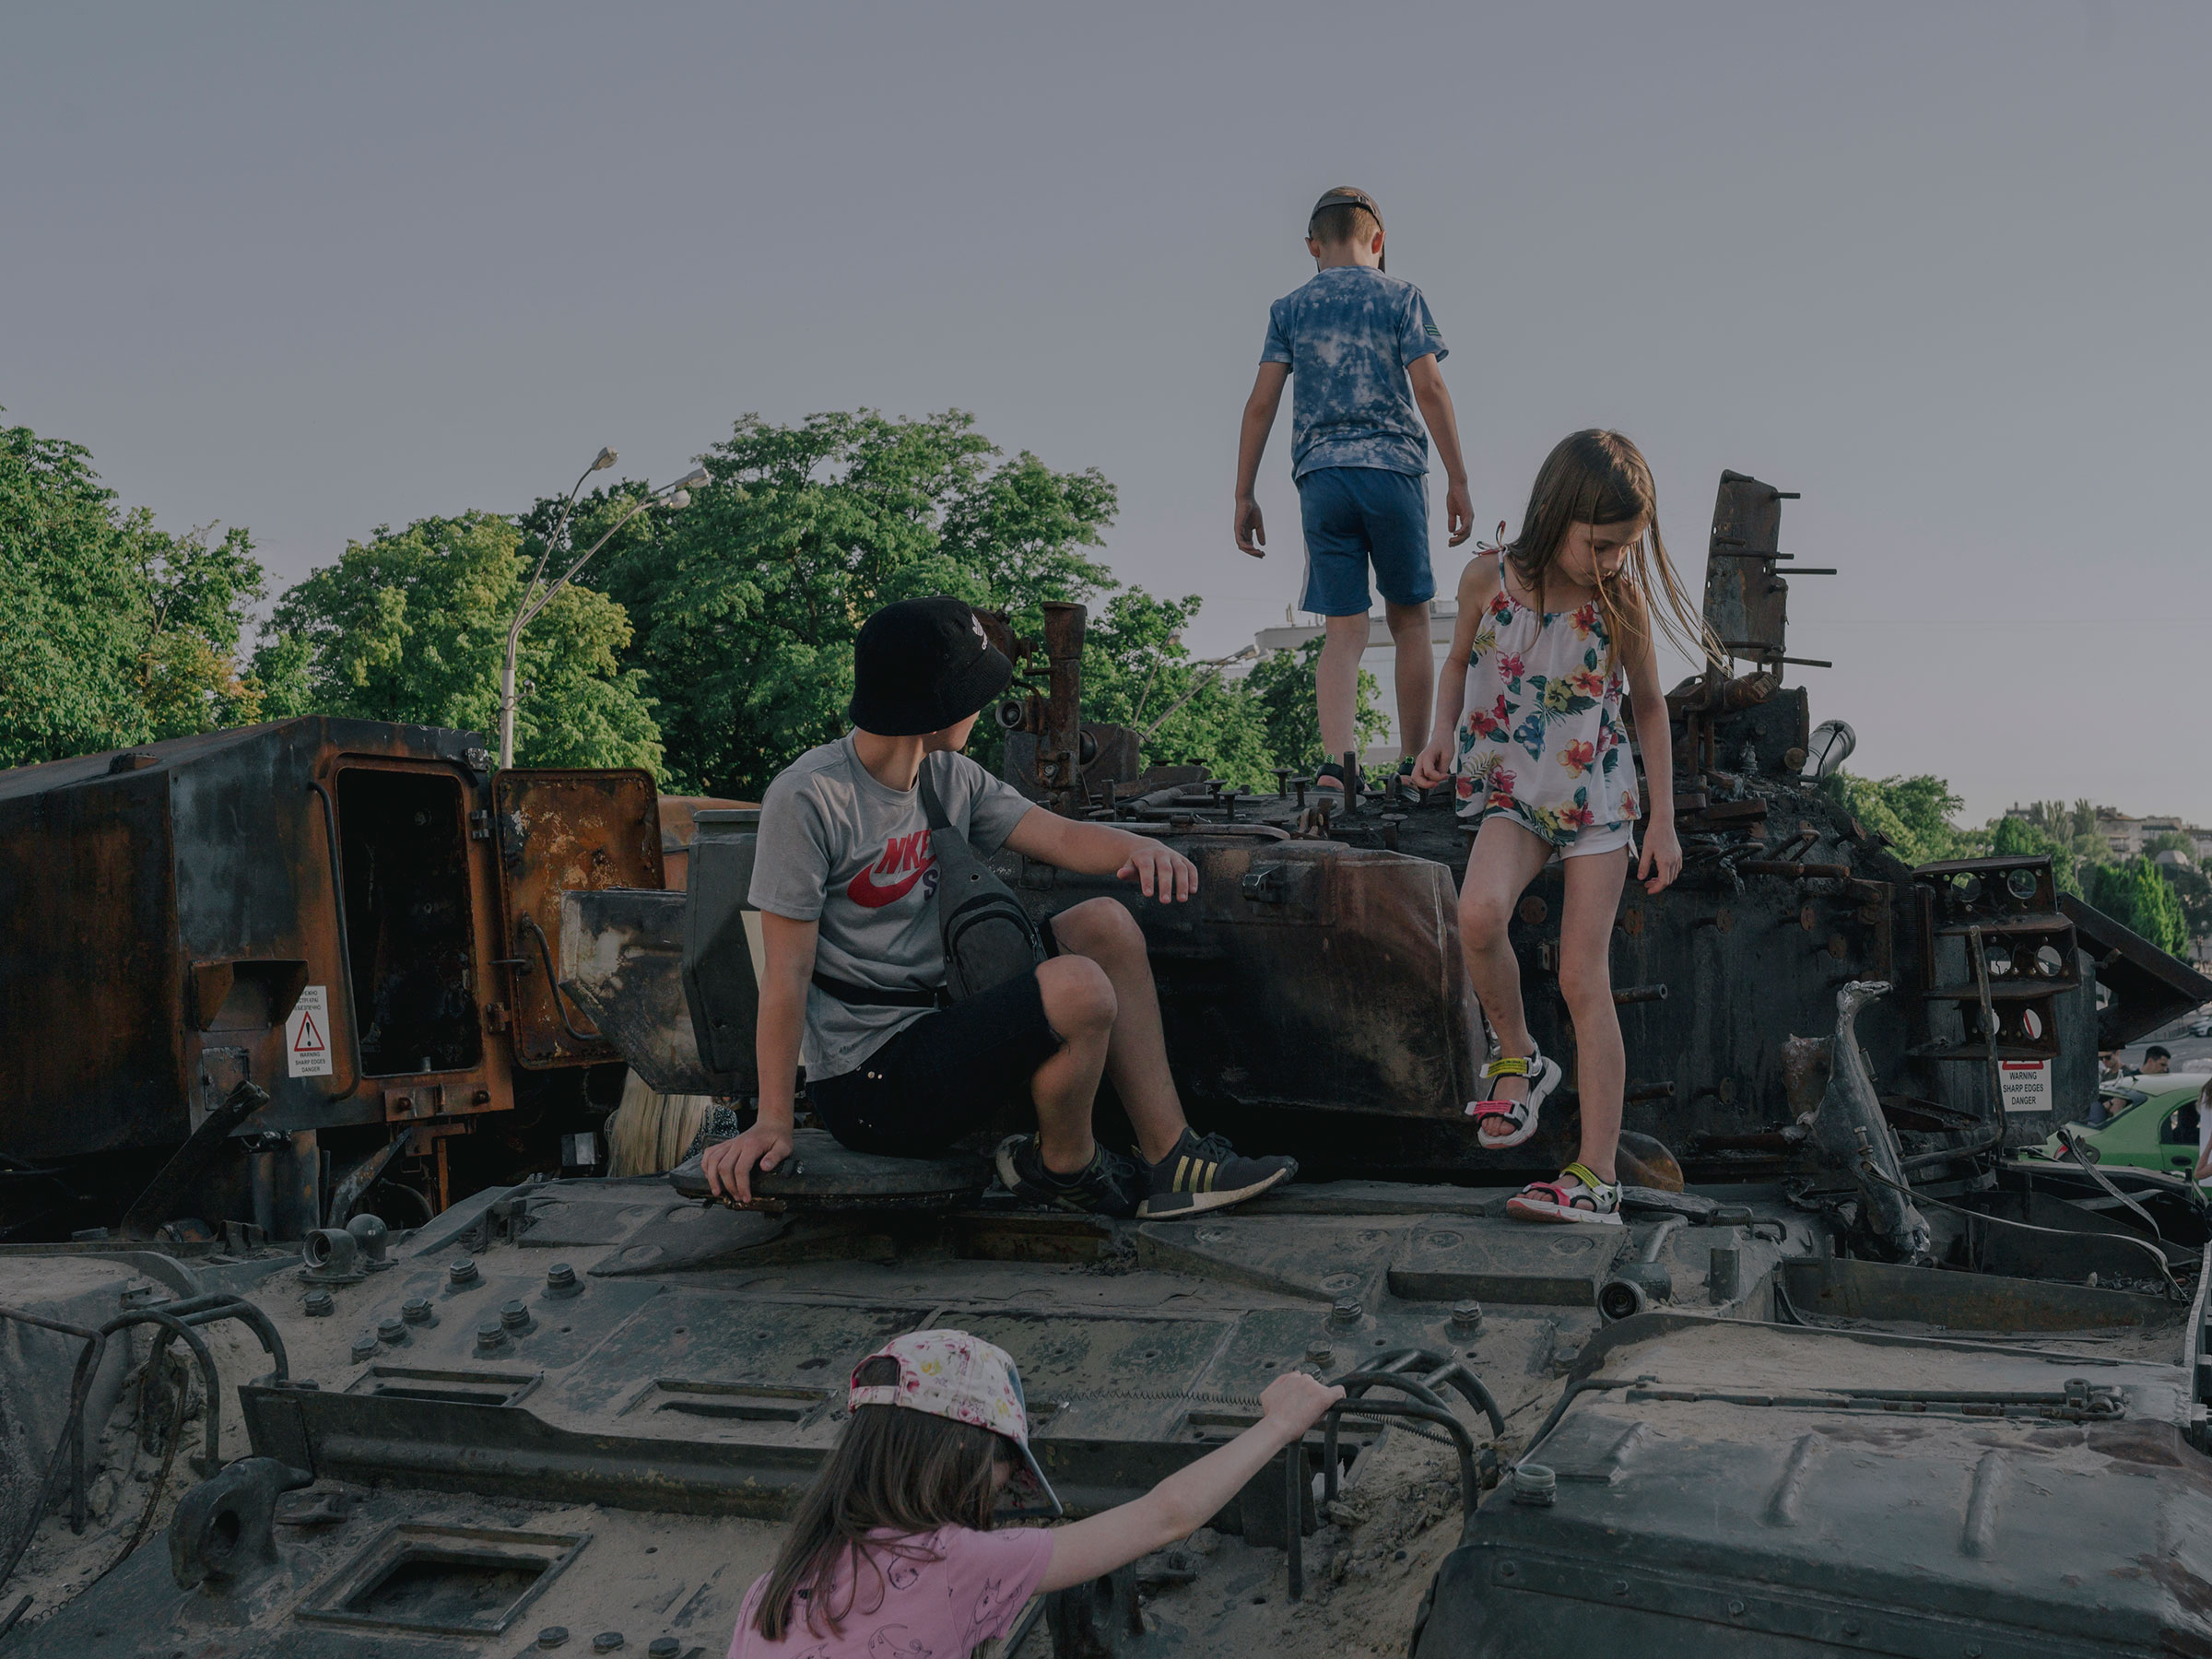 Children play on destroyed Russian war equipment in front of St. Michael‘s Monastery in Kyiv, Ukraine, on June 12. (Fabian Ritter—DOCKS Collective)